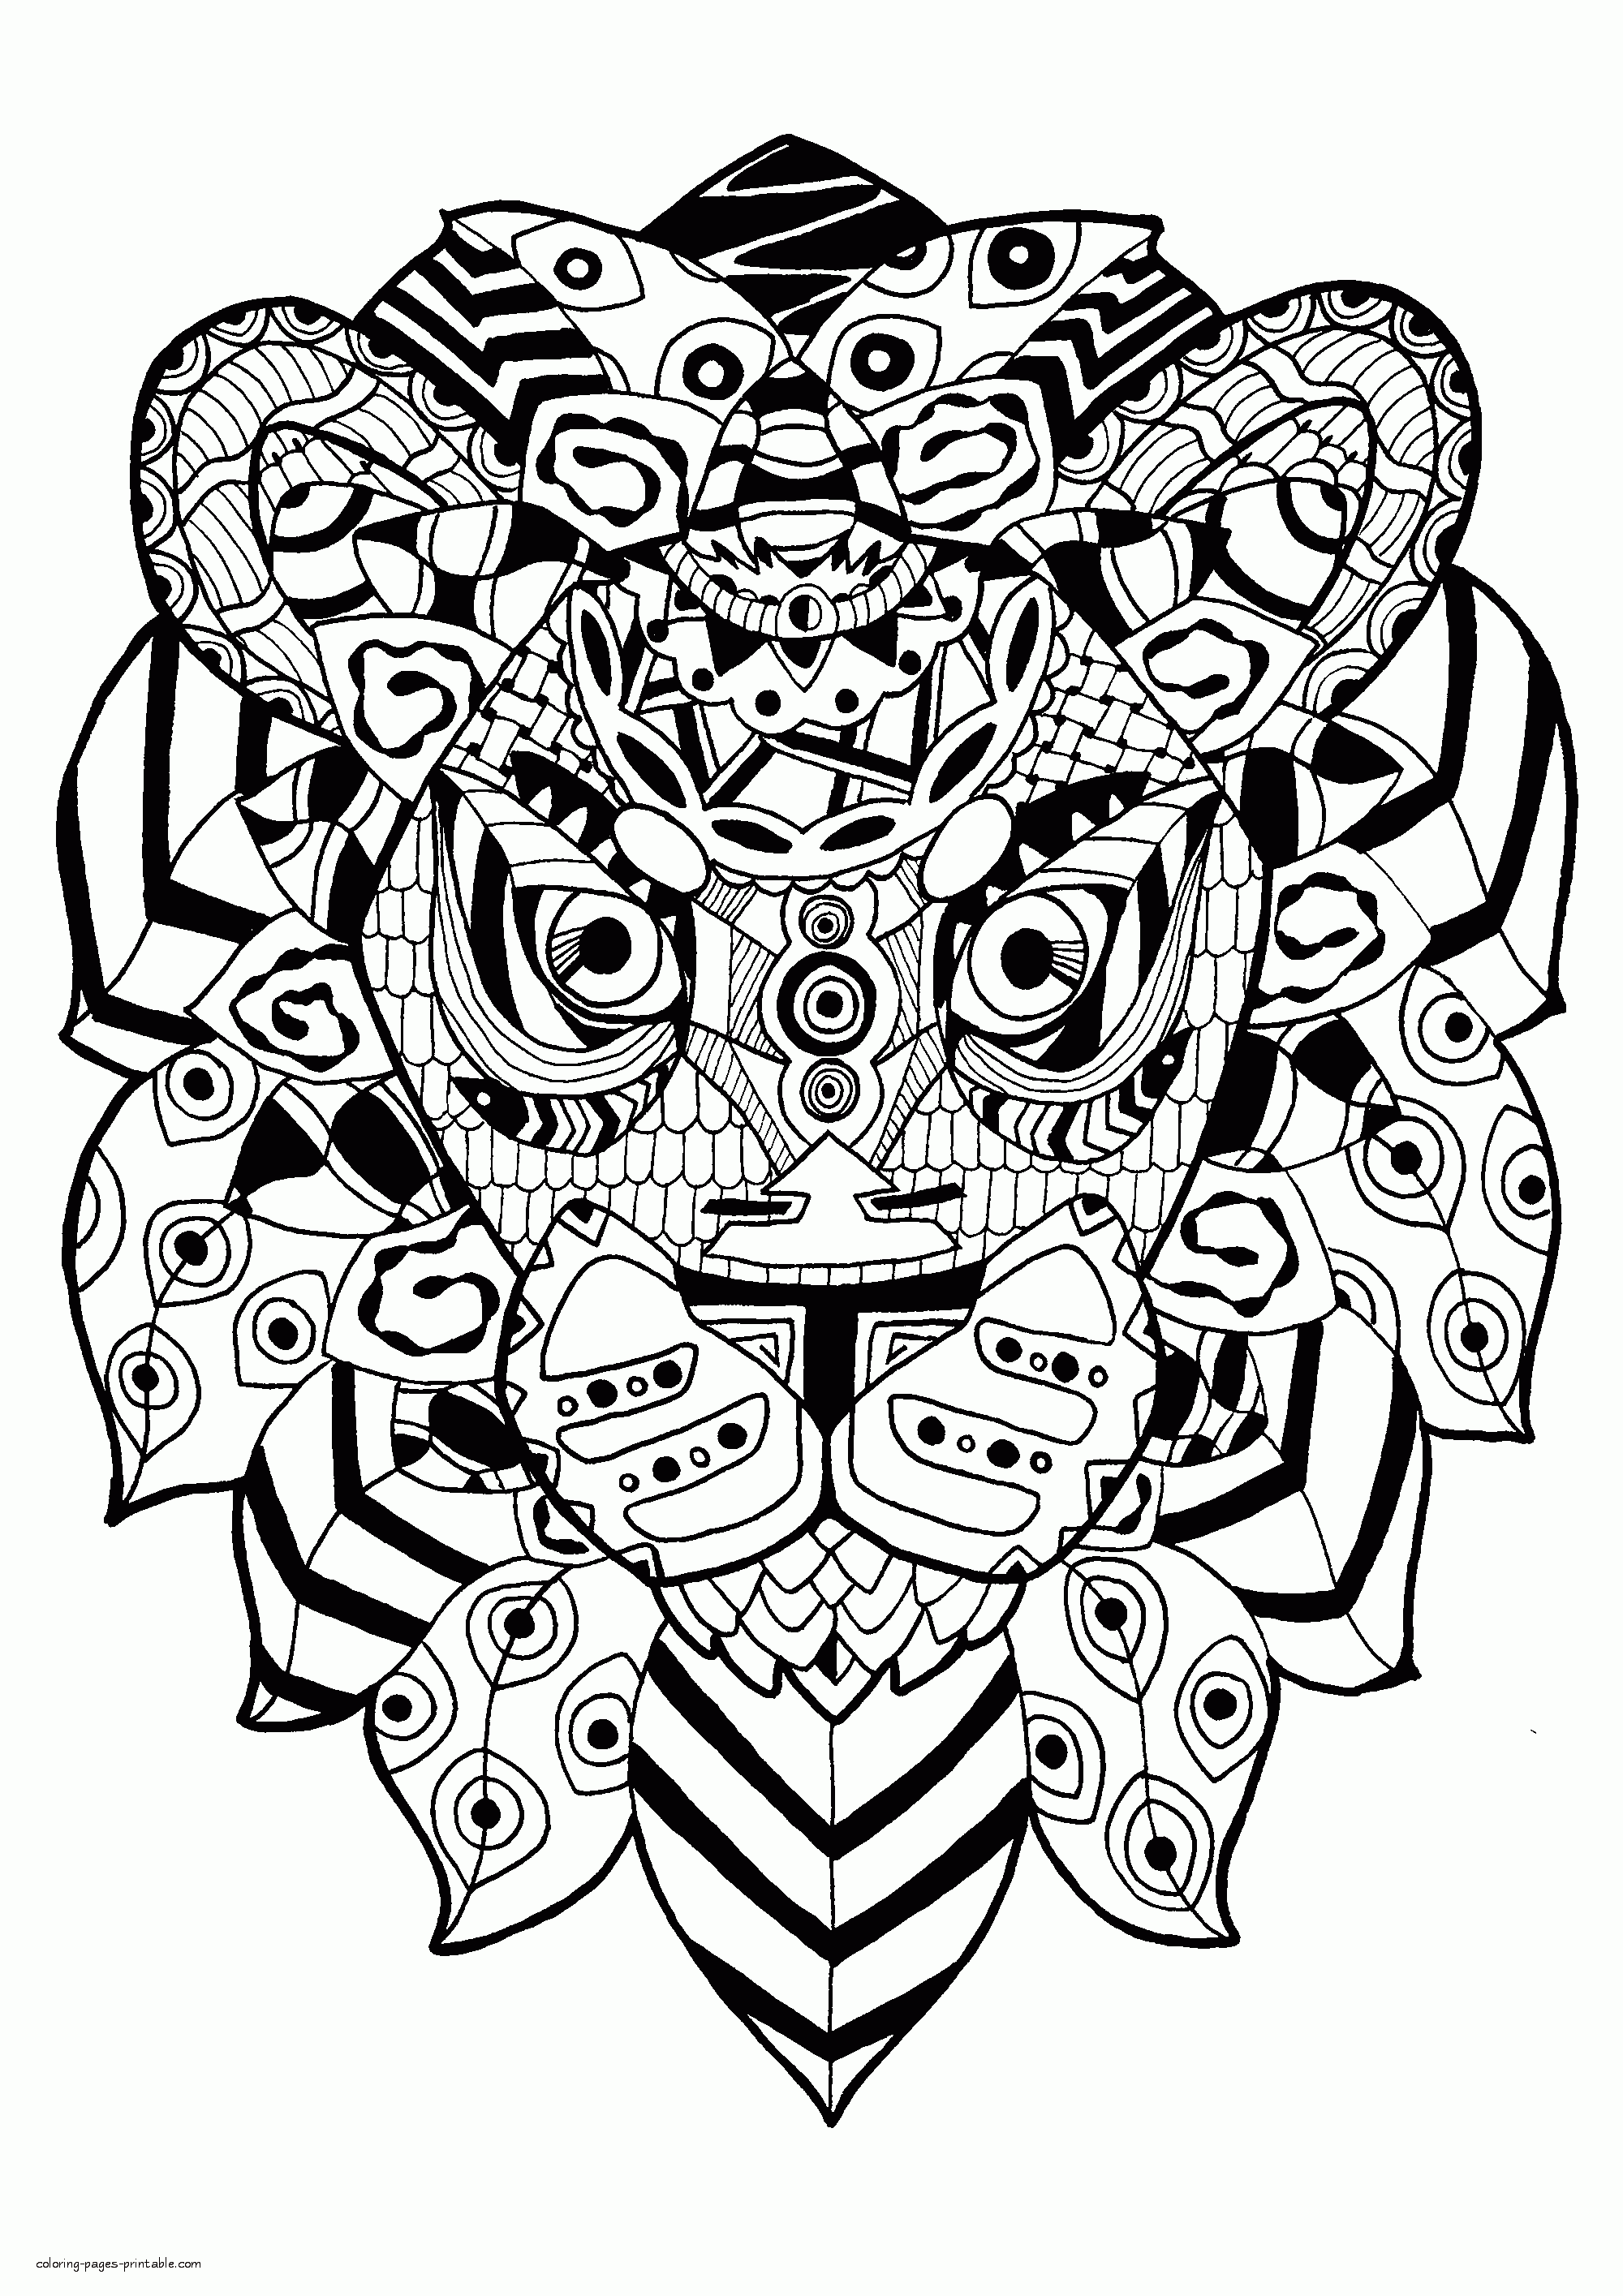 Difficult Zentangle Lion Coloring Page For Adults